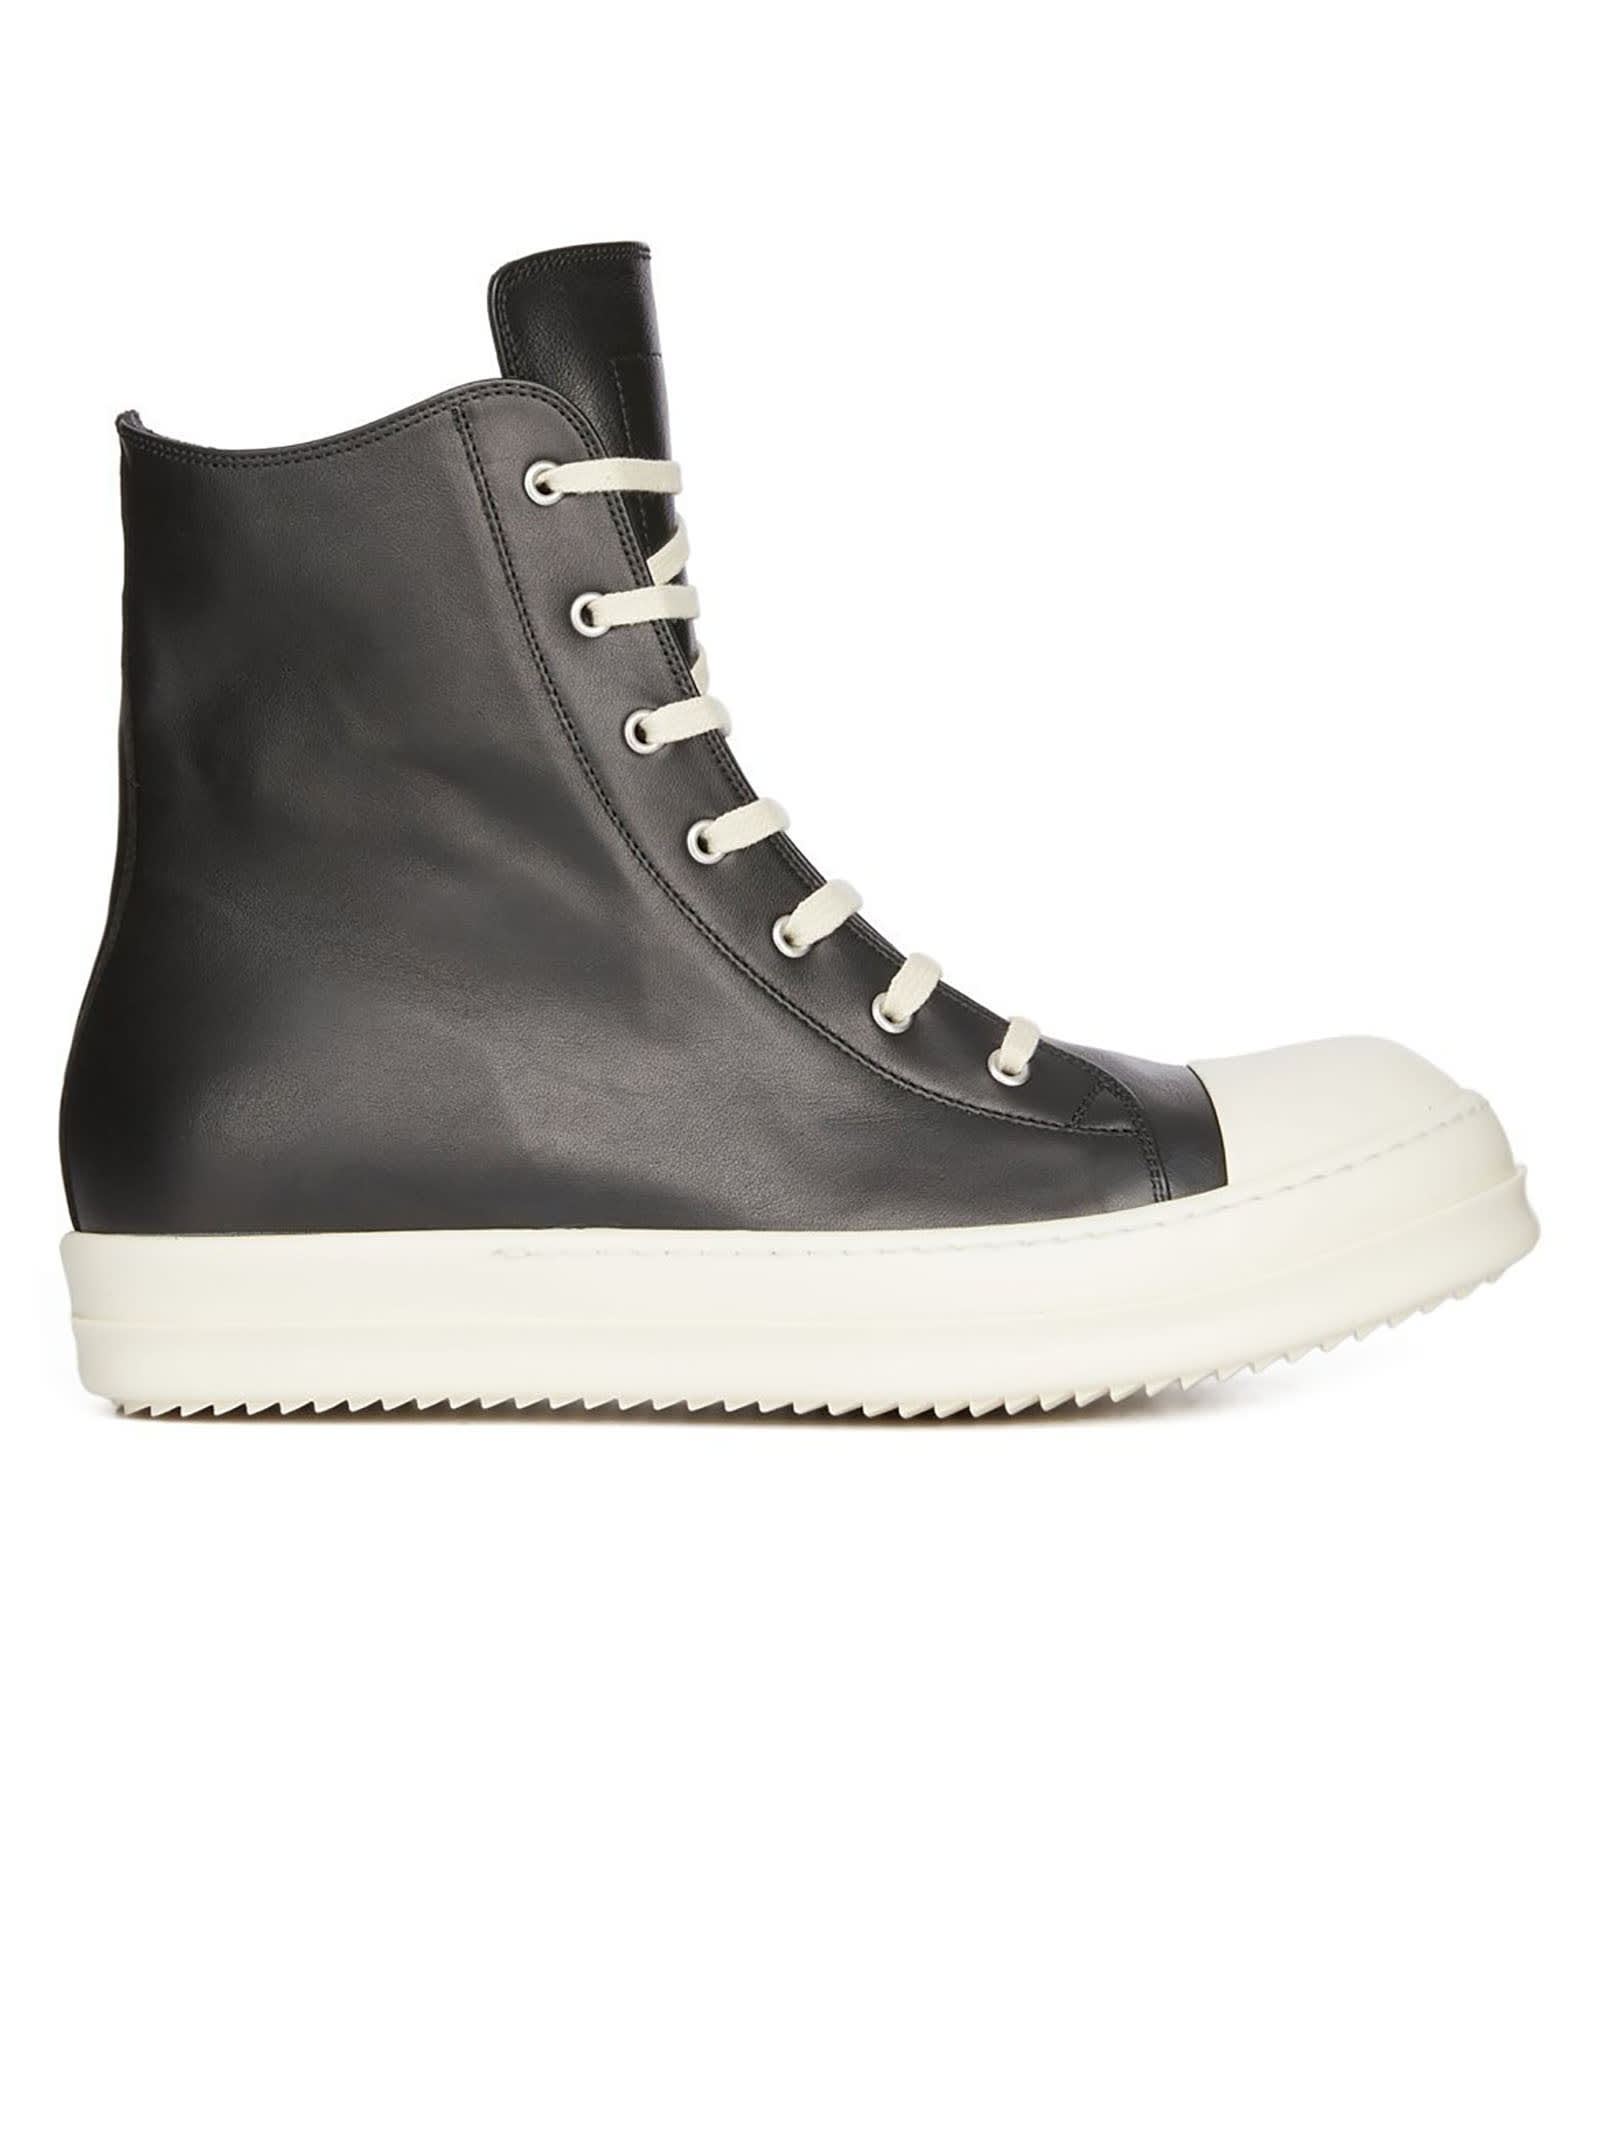 RICK OWENS BLACK CALF LEATHER HIGH-TOP TRAINERS